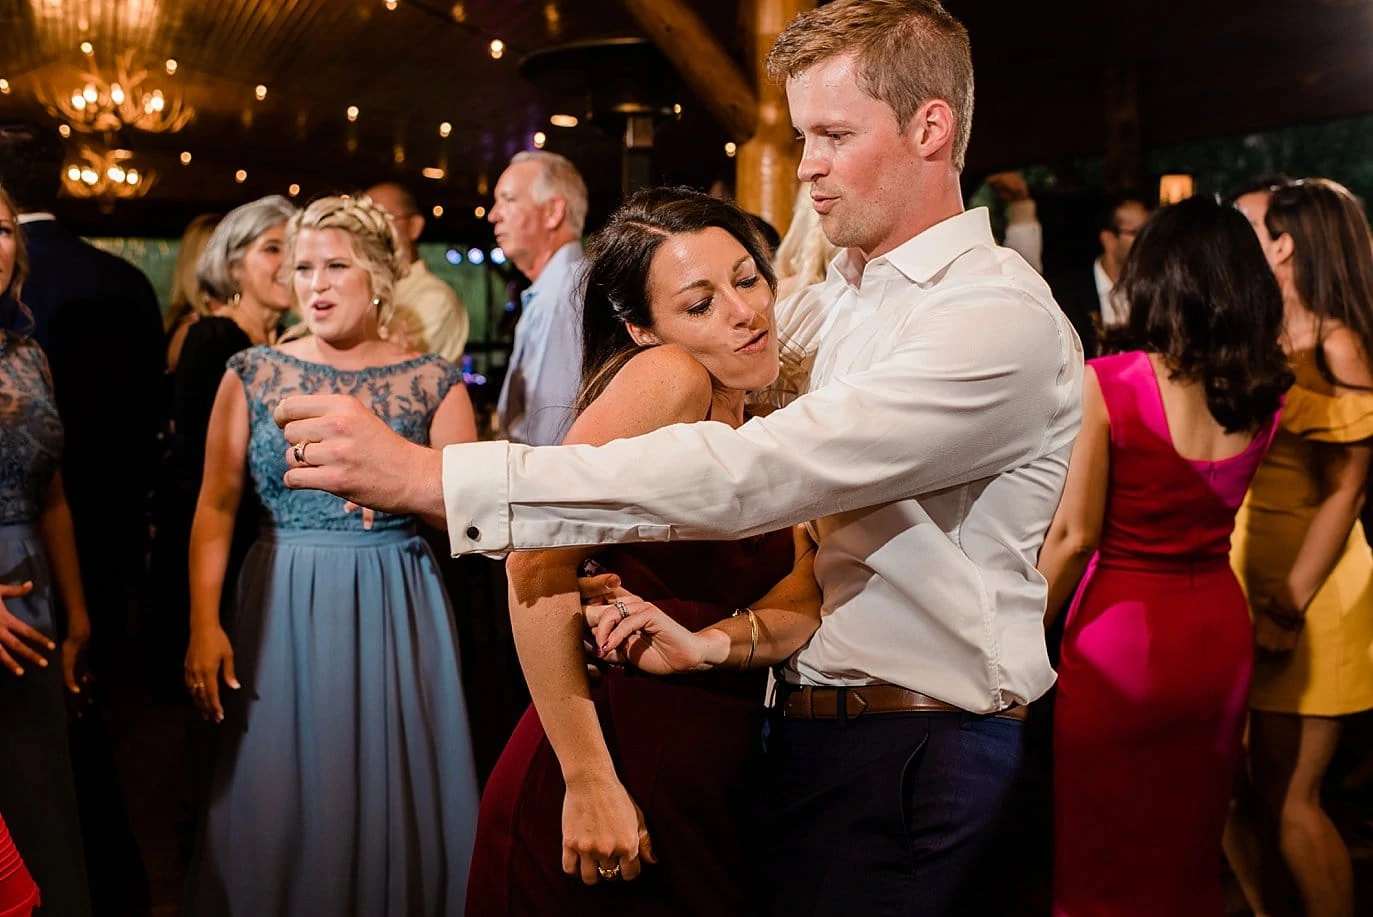 guests dance at outdoor wedding reception at Grand Lake Lodge wedding by Grand Lake wedding photographer Jennie Crate Photographer